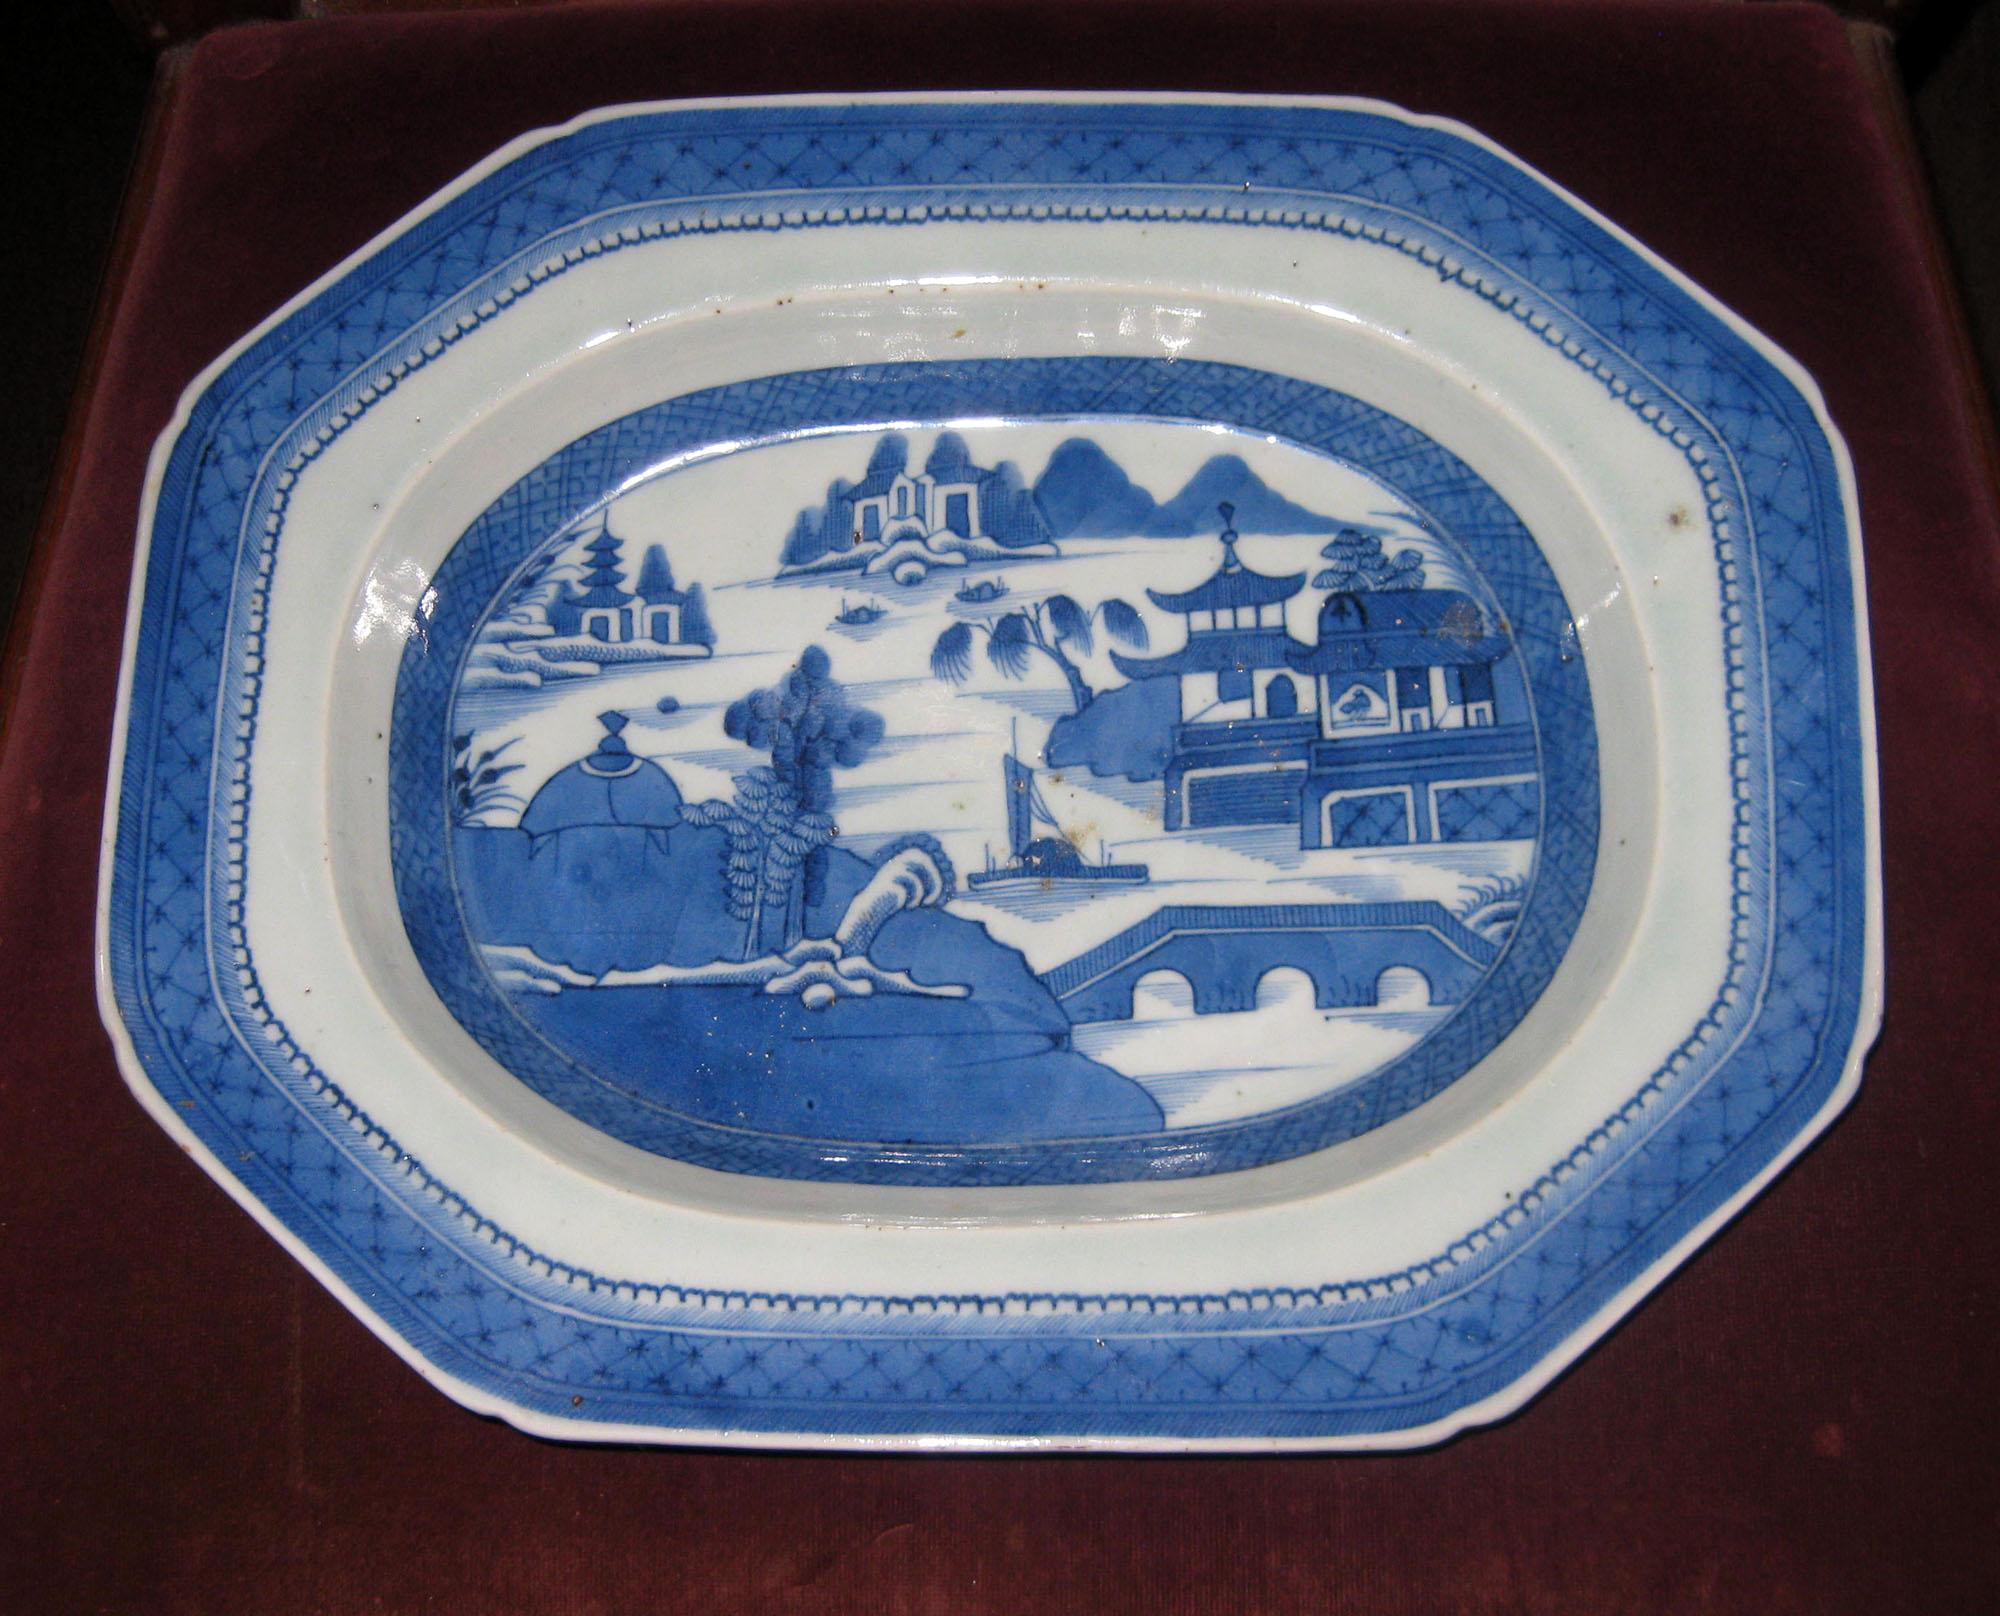 Canton deep octagonal shaped platter decorated in an under-glazed blue with a traditional Chinese hand decoration set against a white porcelain ground. The bottom rim of the platter is unglazed.
Canton porcelain was manufactured and fired in the